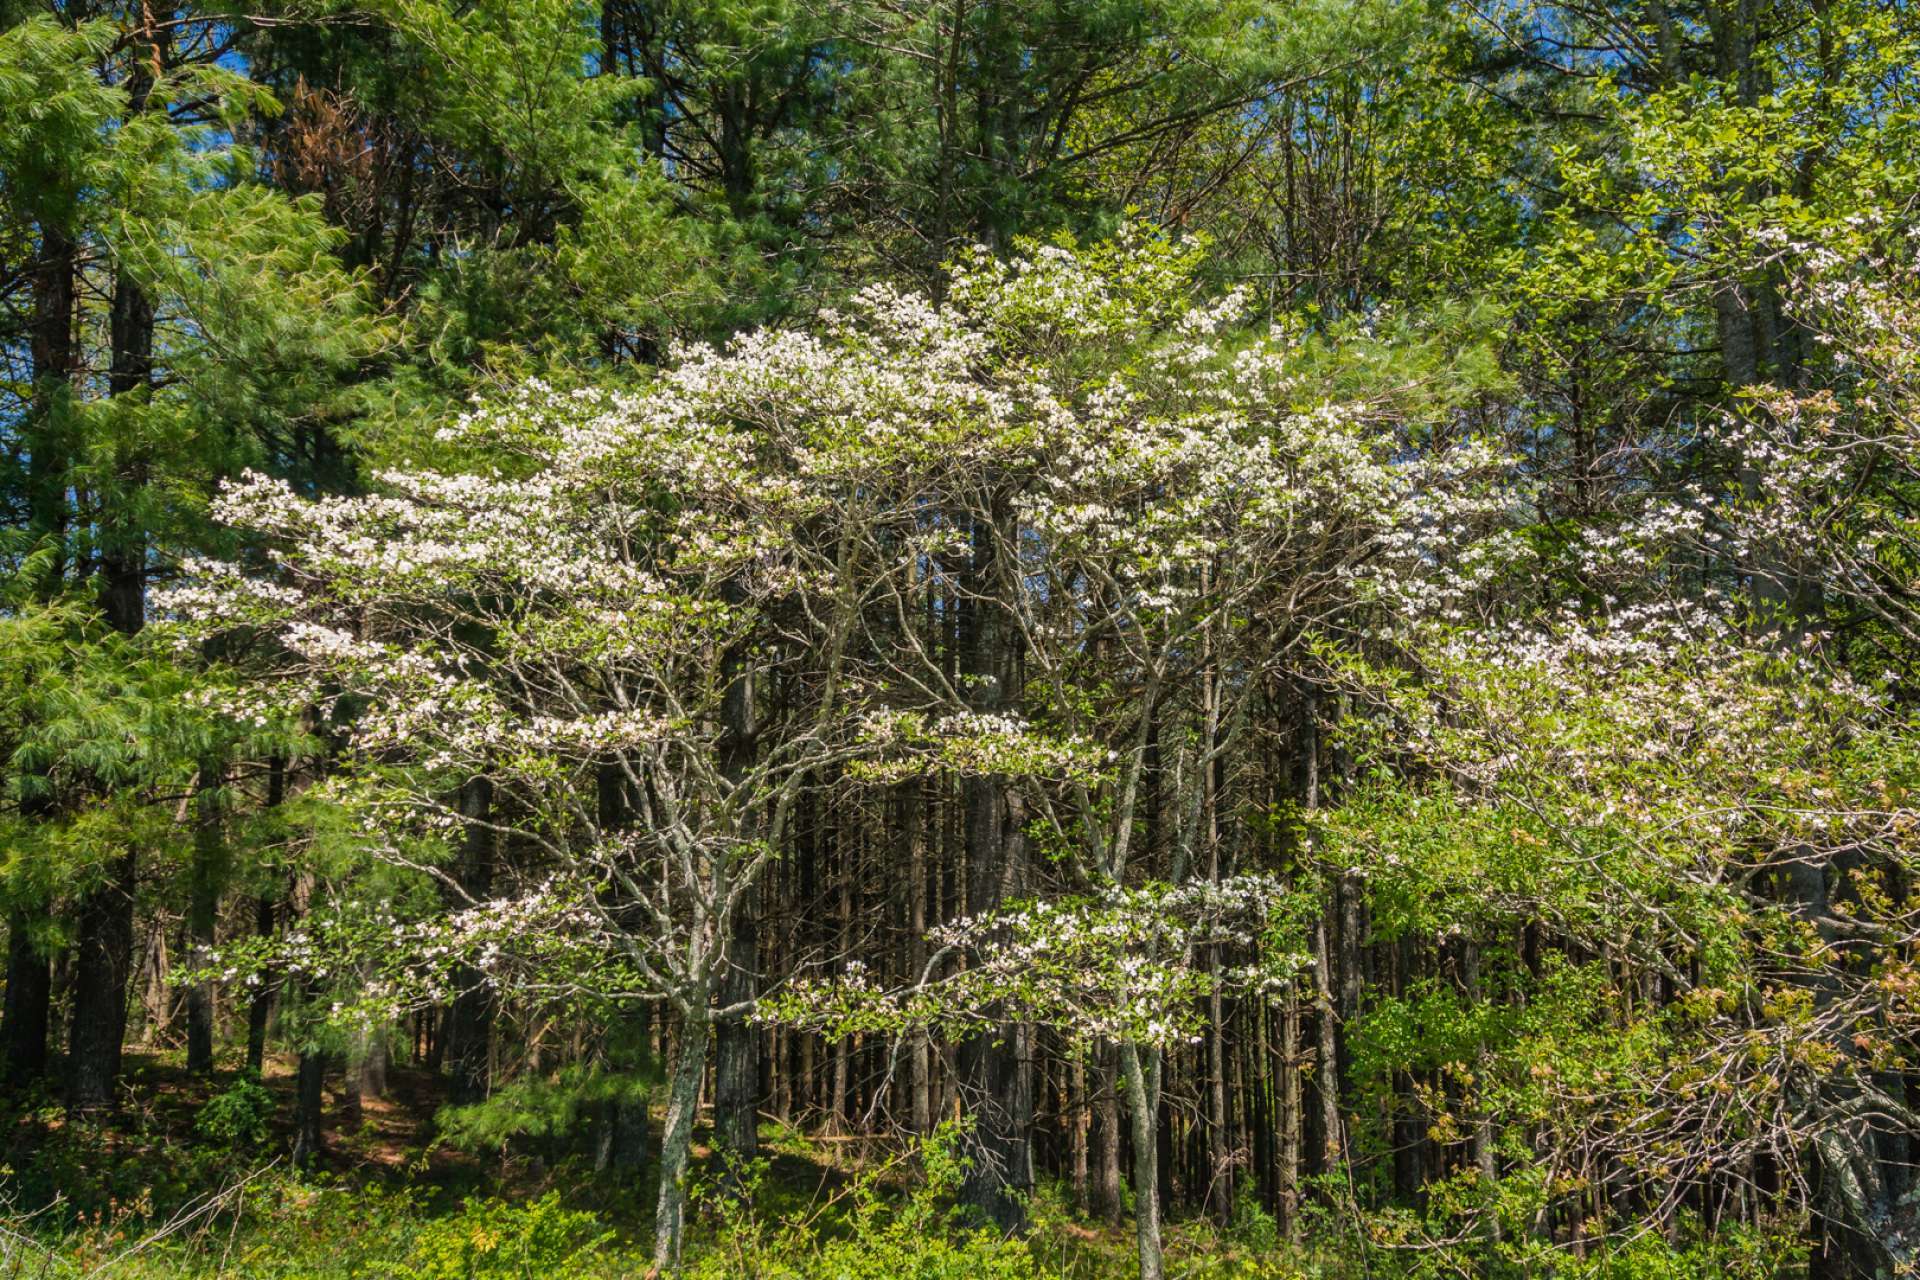 The dogwoods are blooming now and set the stage for other native mountain foliage  and wildflower blooms.